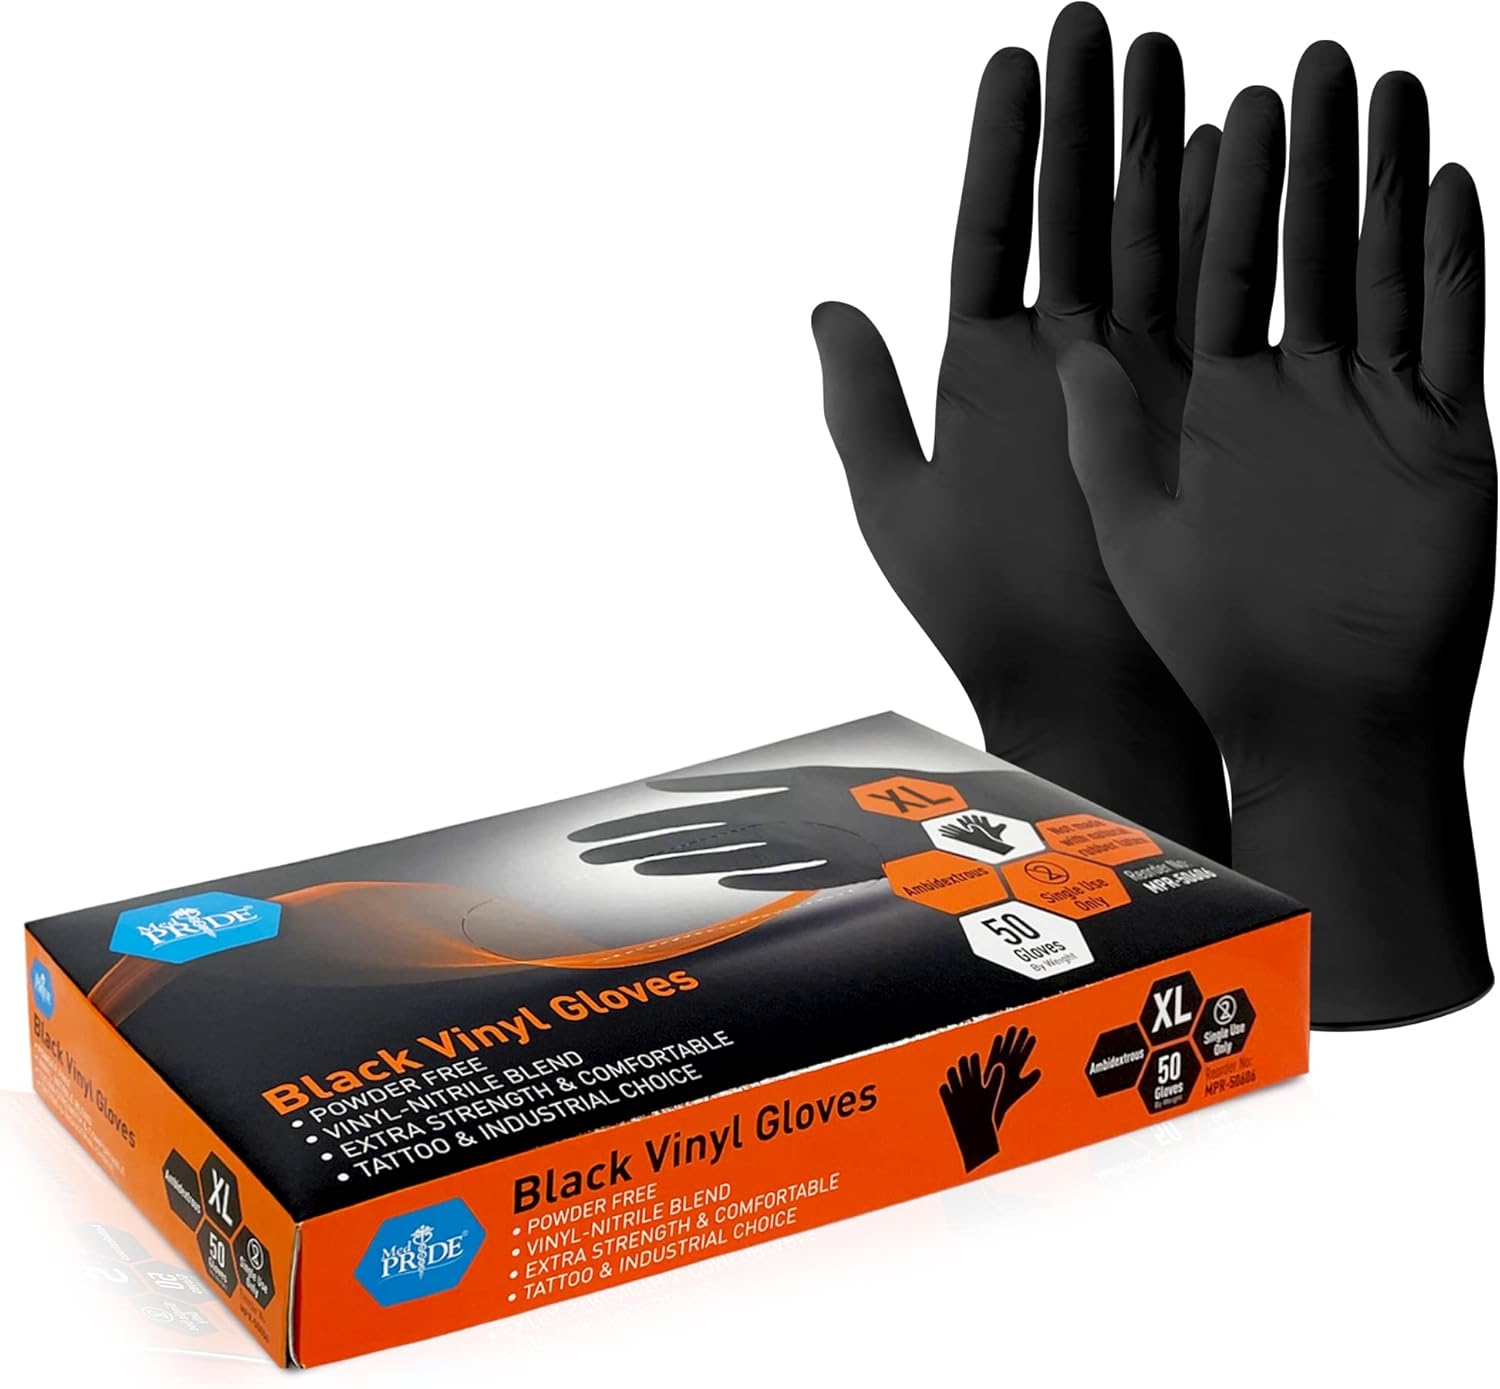 MED PRIDE Extra Strength Black Vinyl Disposable Gloves, Powder & Latex-Free, For Surgical, Tattoo Artist, Food Prep Use